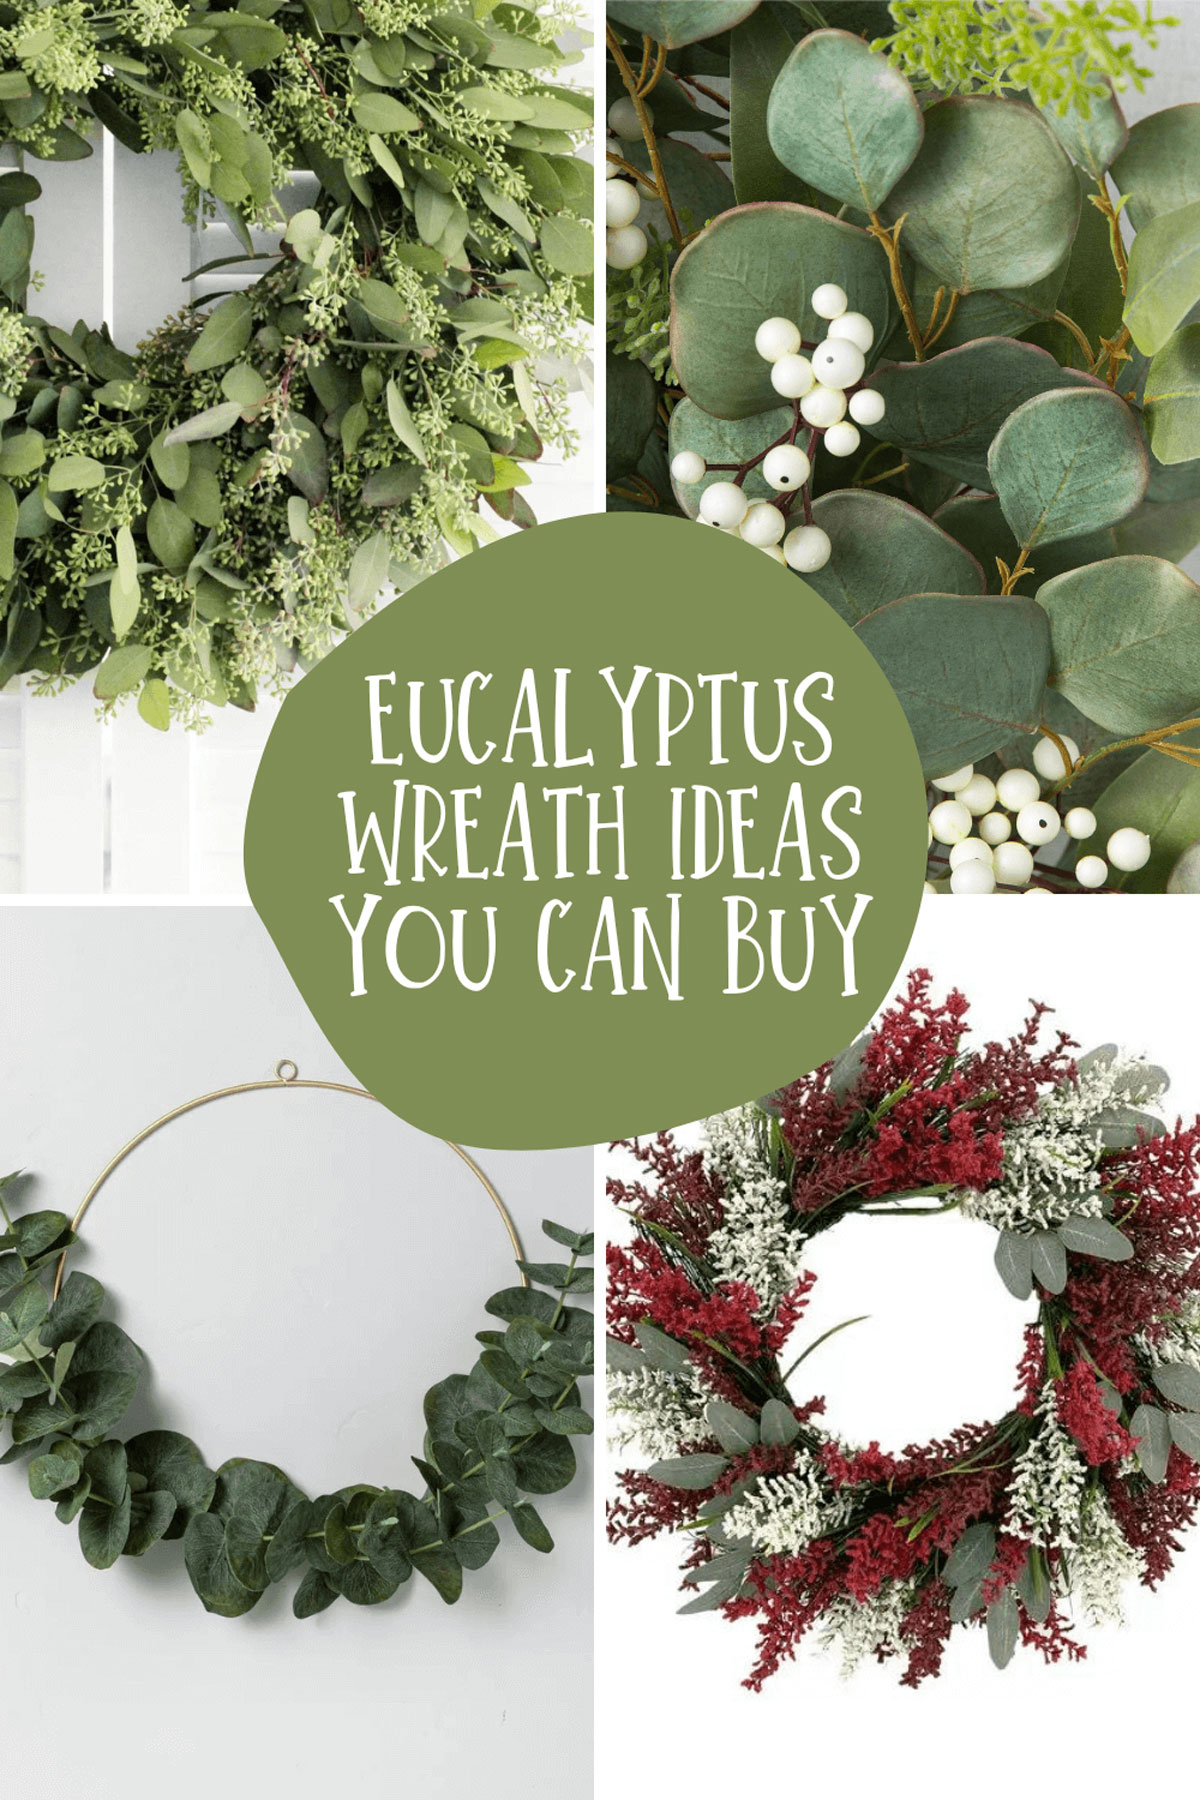 Dried and fresh Wreath ideas to buy for winter